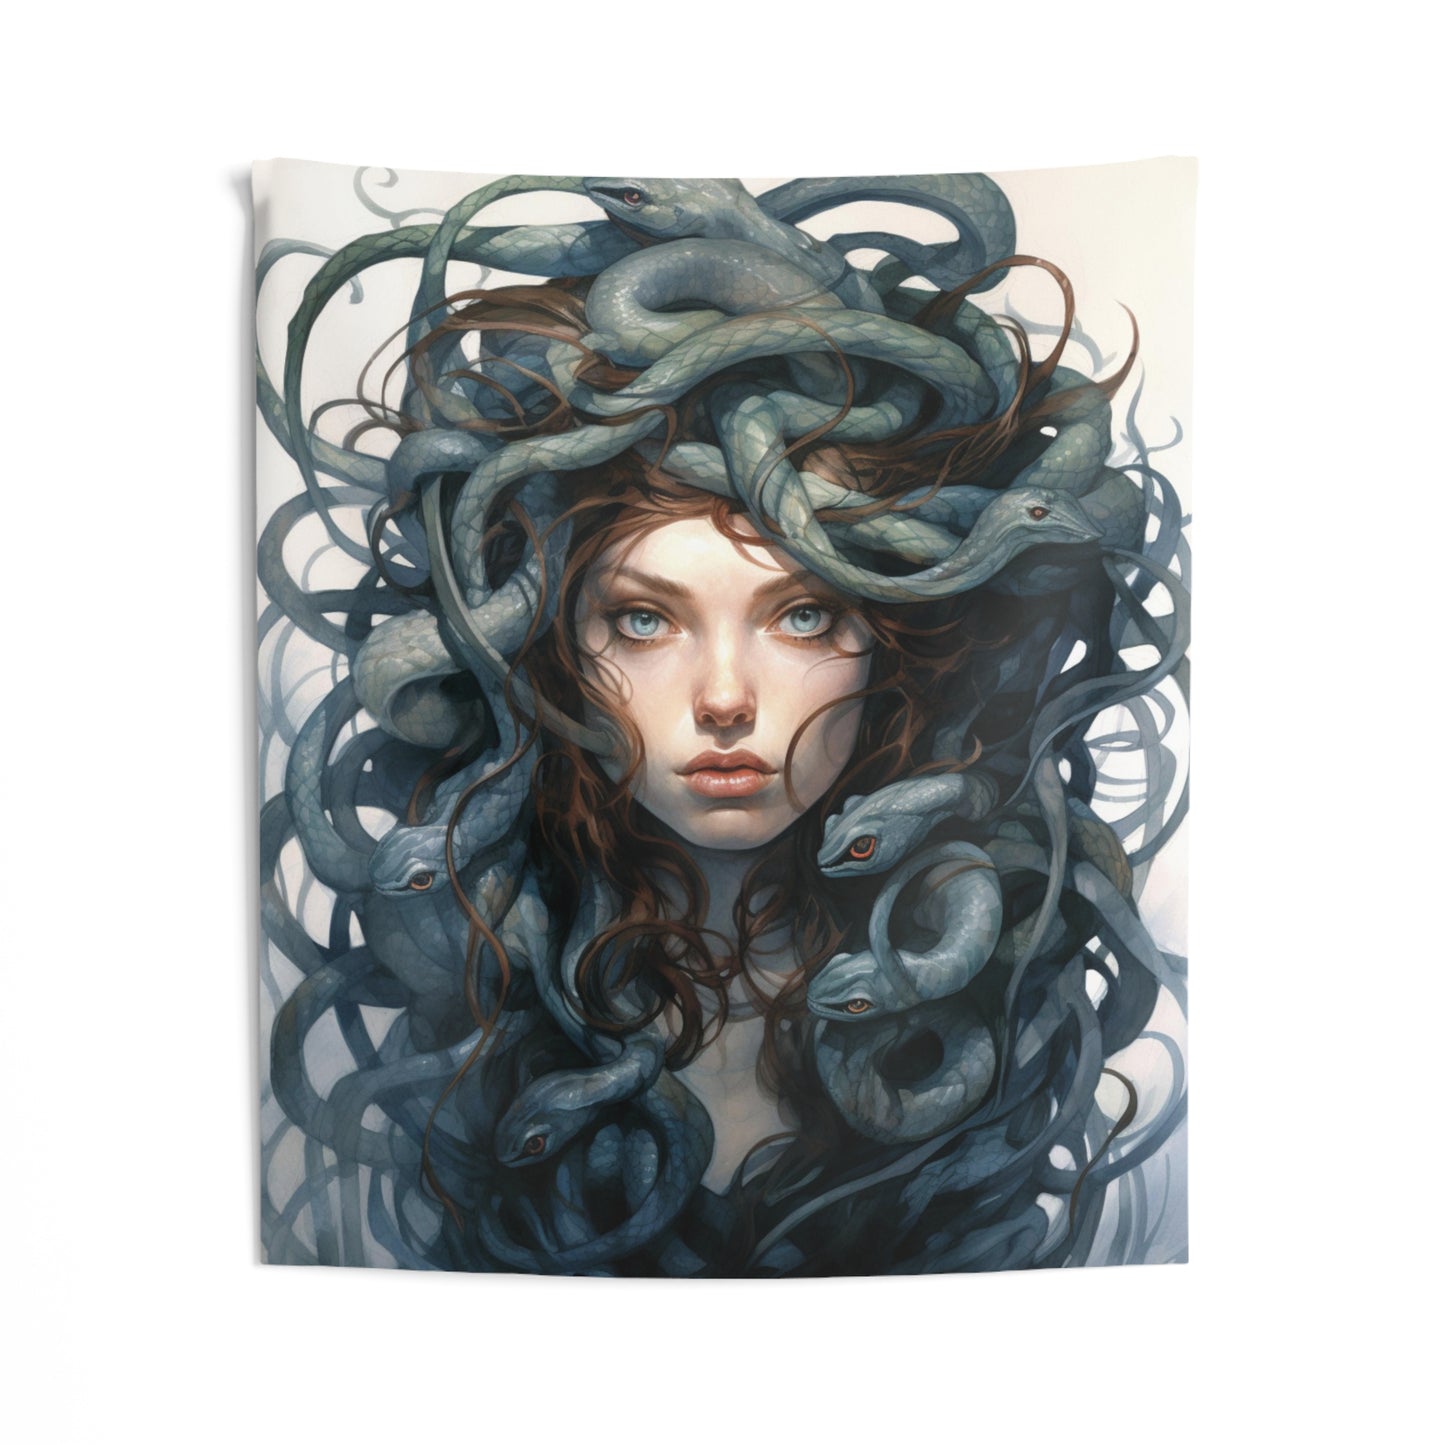 Medusa Tapestry, Women Mythology Snakes Hair Wall Art Hanging Cool Unique Vertical Aesthetic Large Small Decor Bedroom College Dorm Starcove Fashion